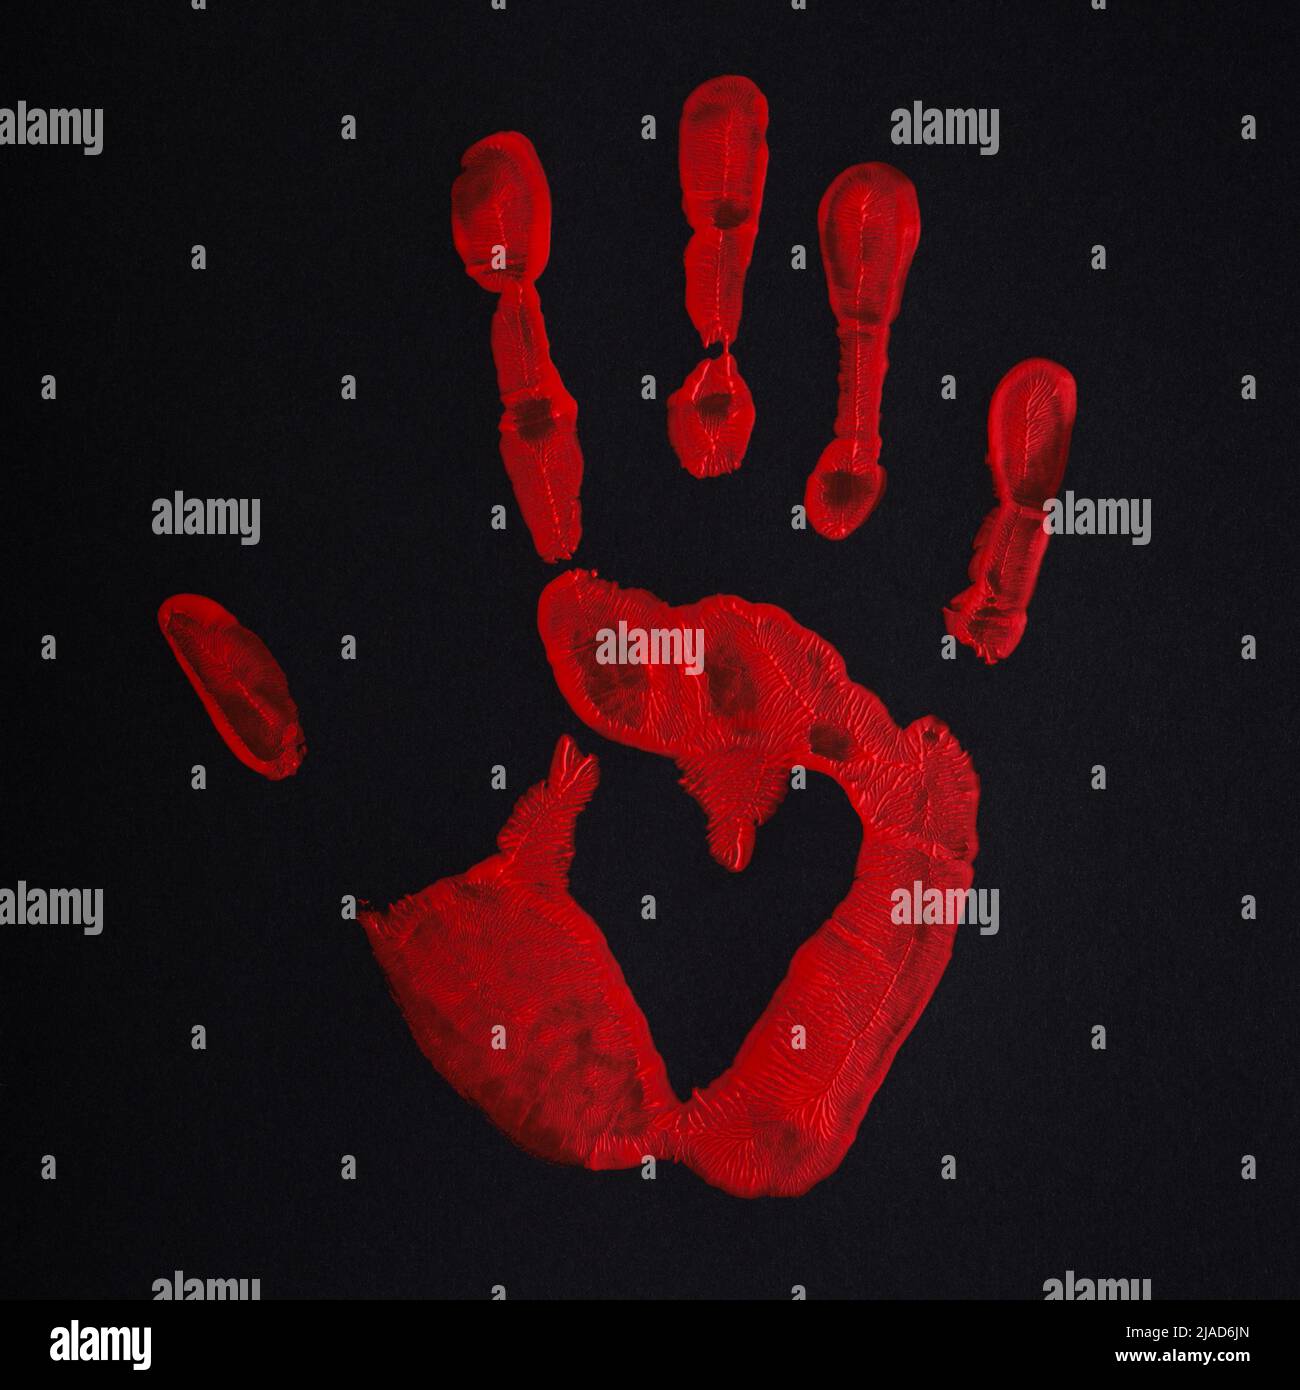 Red palm print on black background with heart, stop bloodshed and war, peace concept. Stock Photo